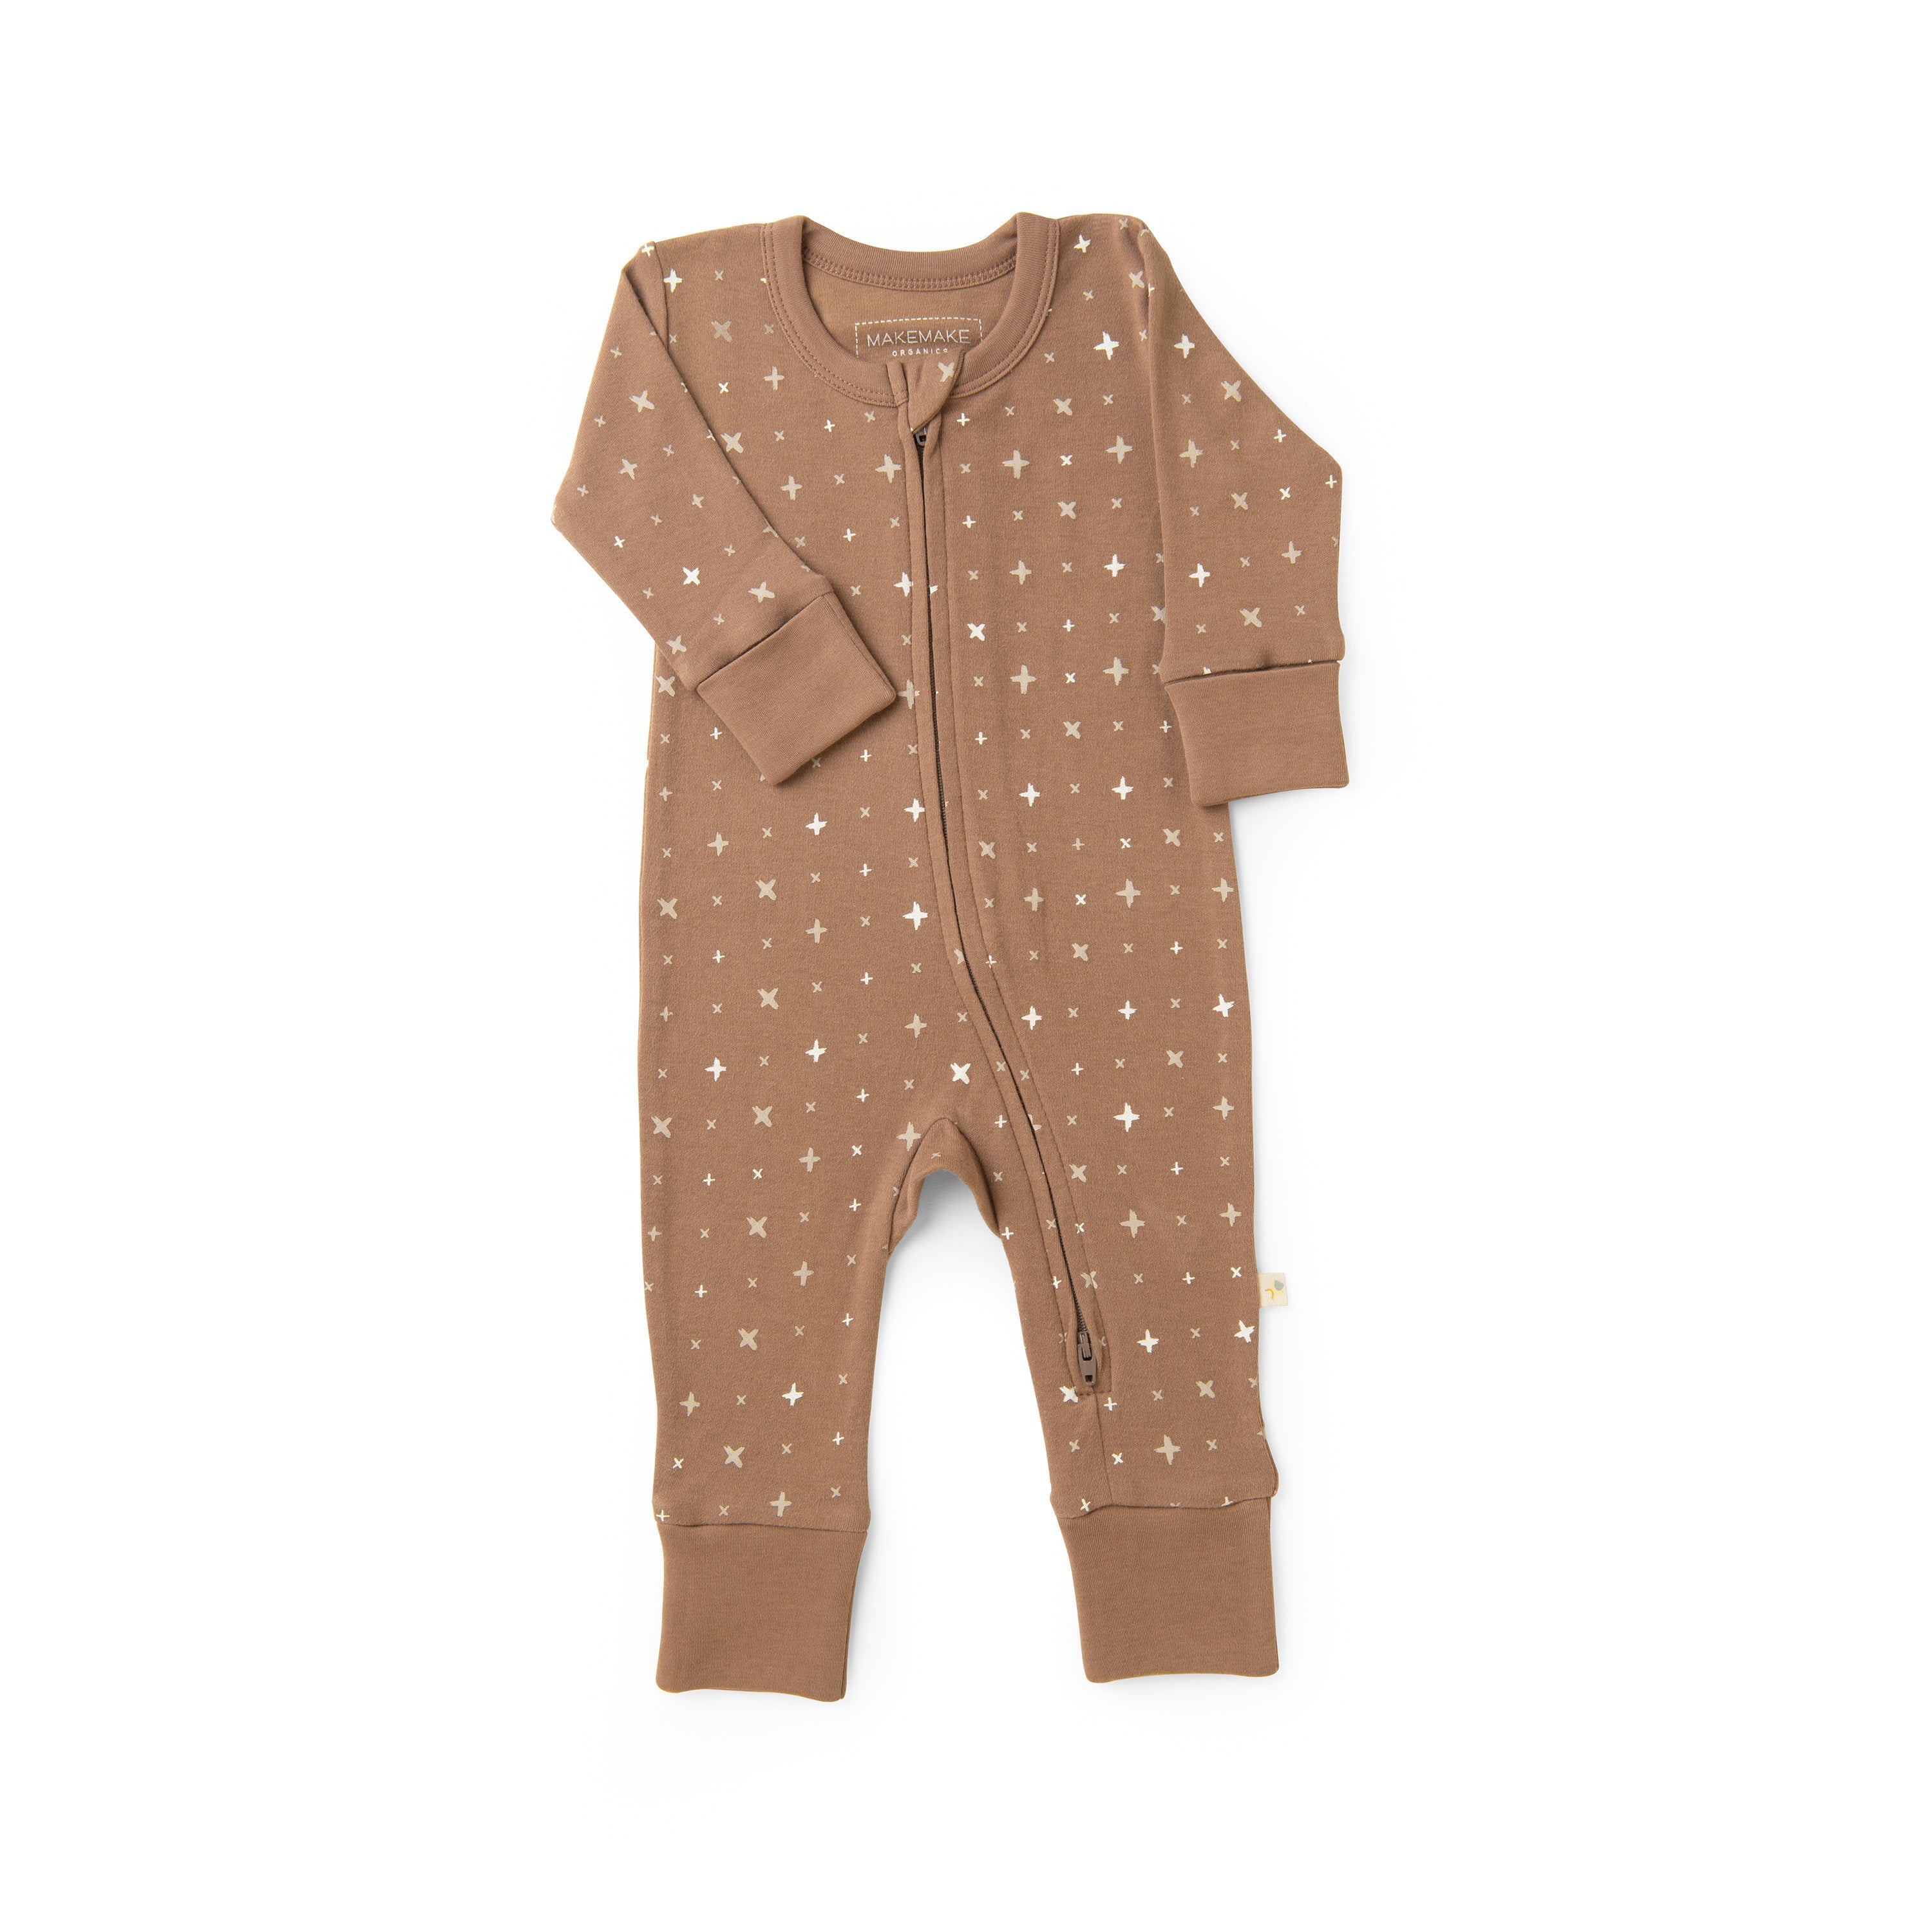 A brown baby Organic 2-Way Zip Romper - Sparkle with a white stars and crosses pattern laid flat on a white background. the garment features full sleeves and legs with a central zipper for easy dressing. (Brand Name: Organic Baby)